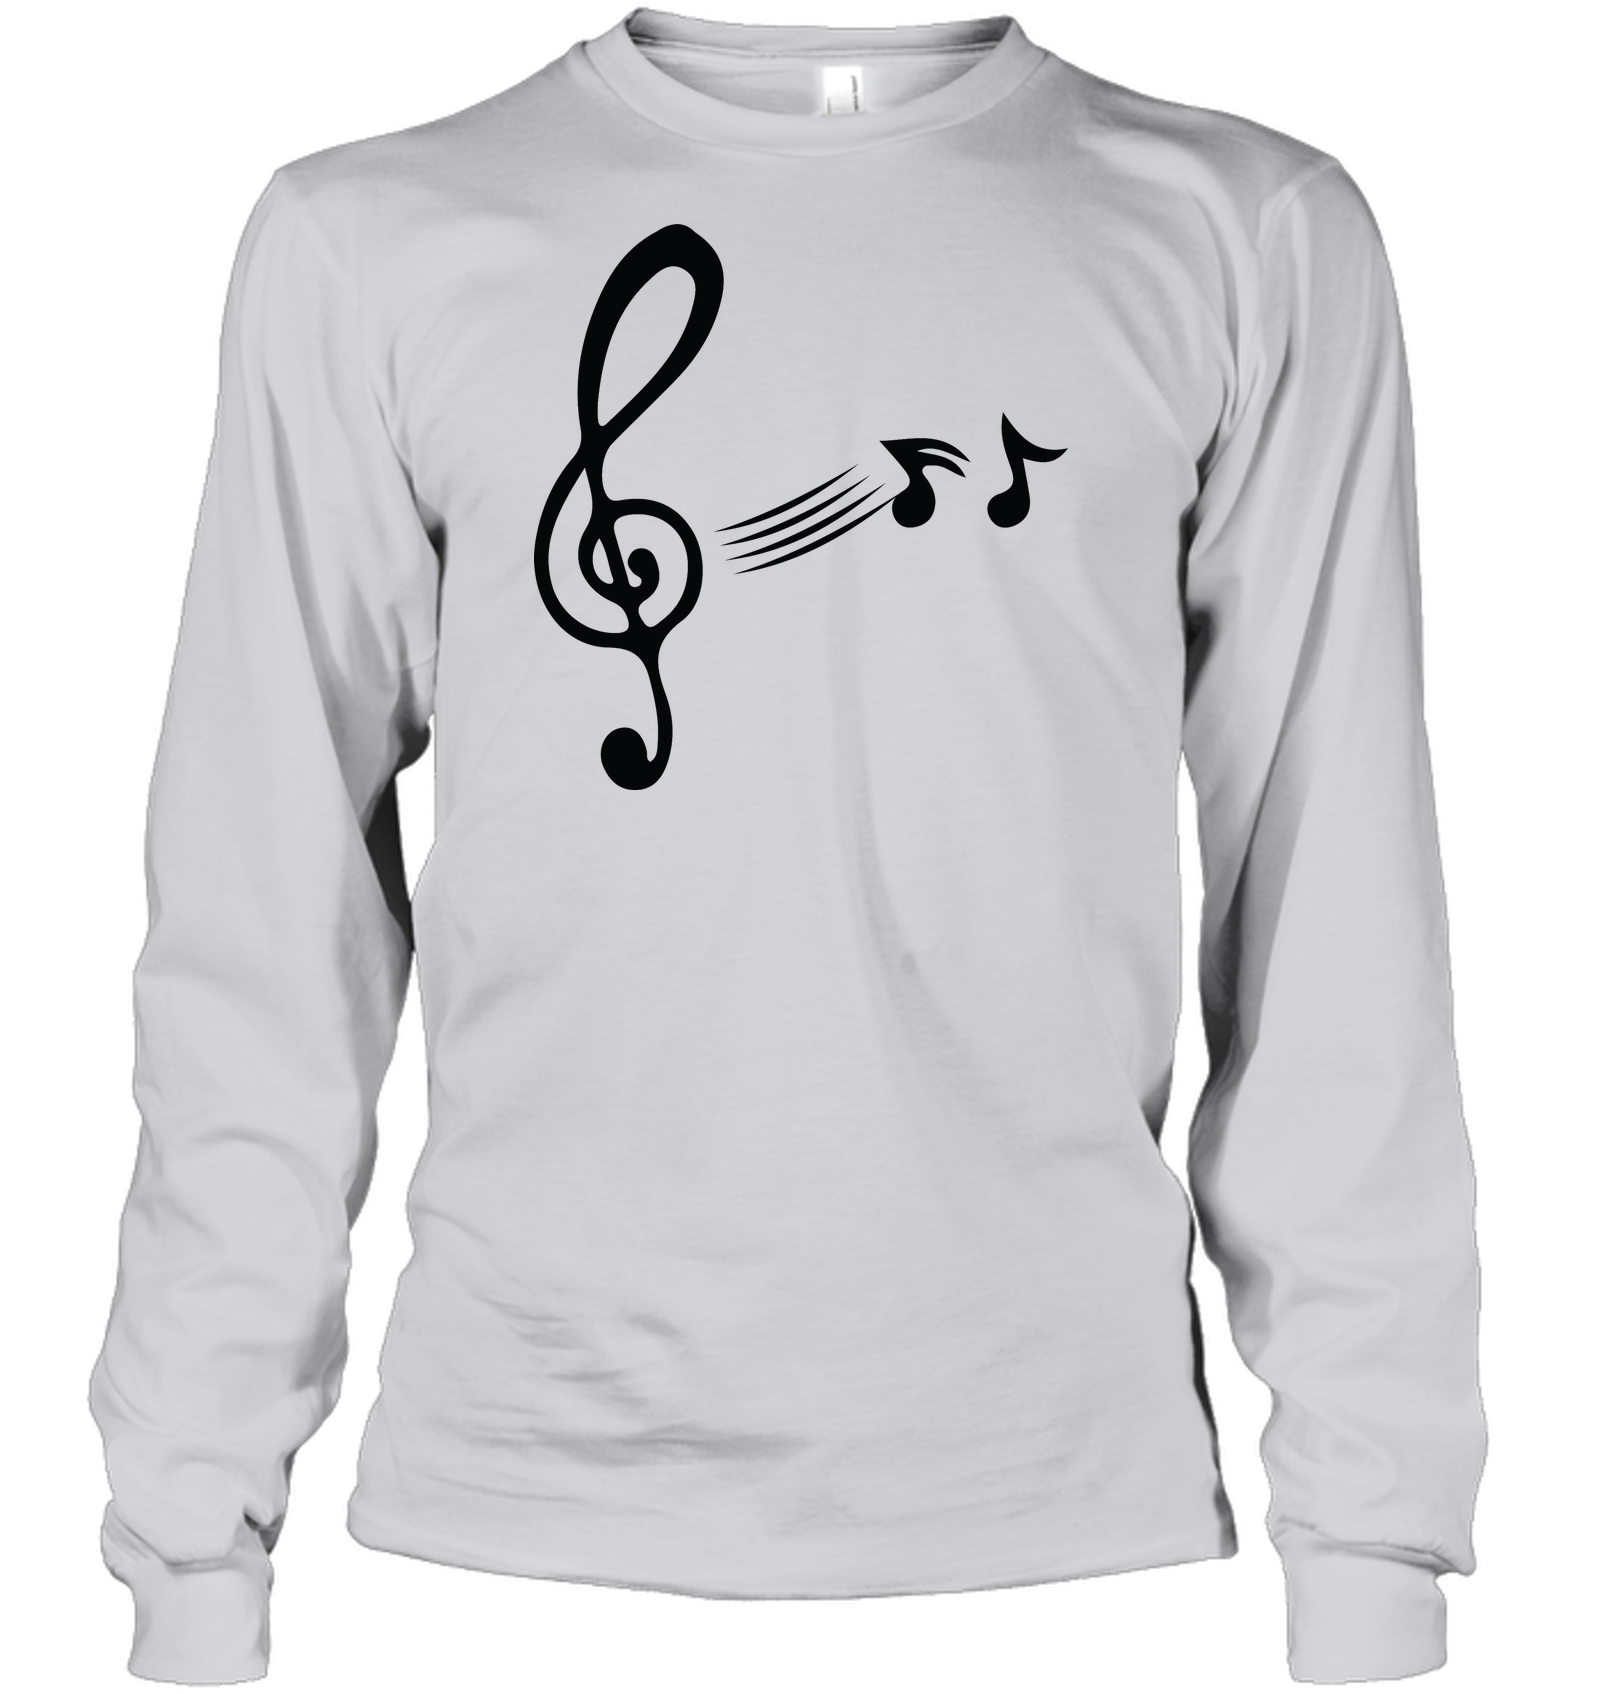 Treble Clef with floating Notes - Gildan Adult Classic Long Sleeve T-Shirt